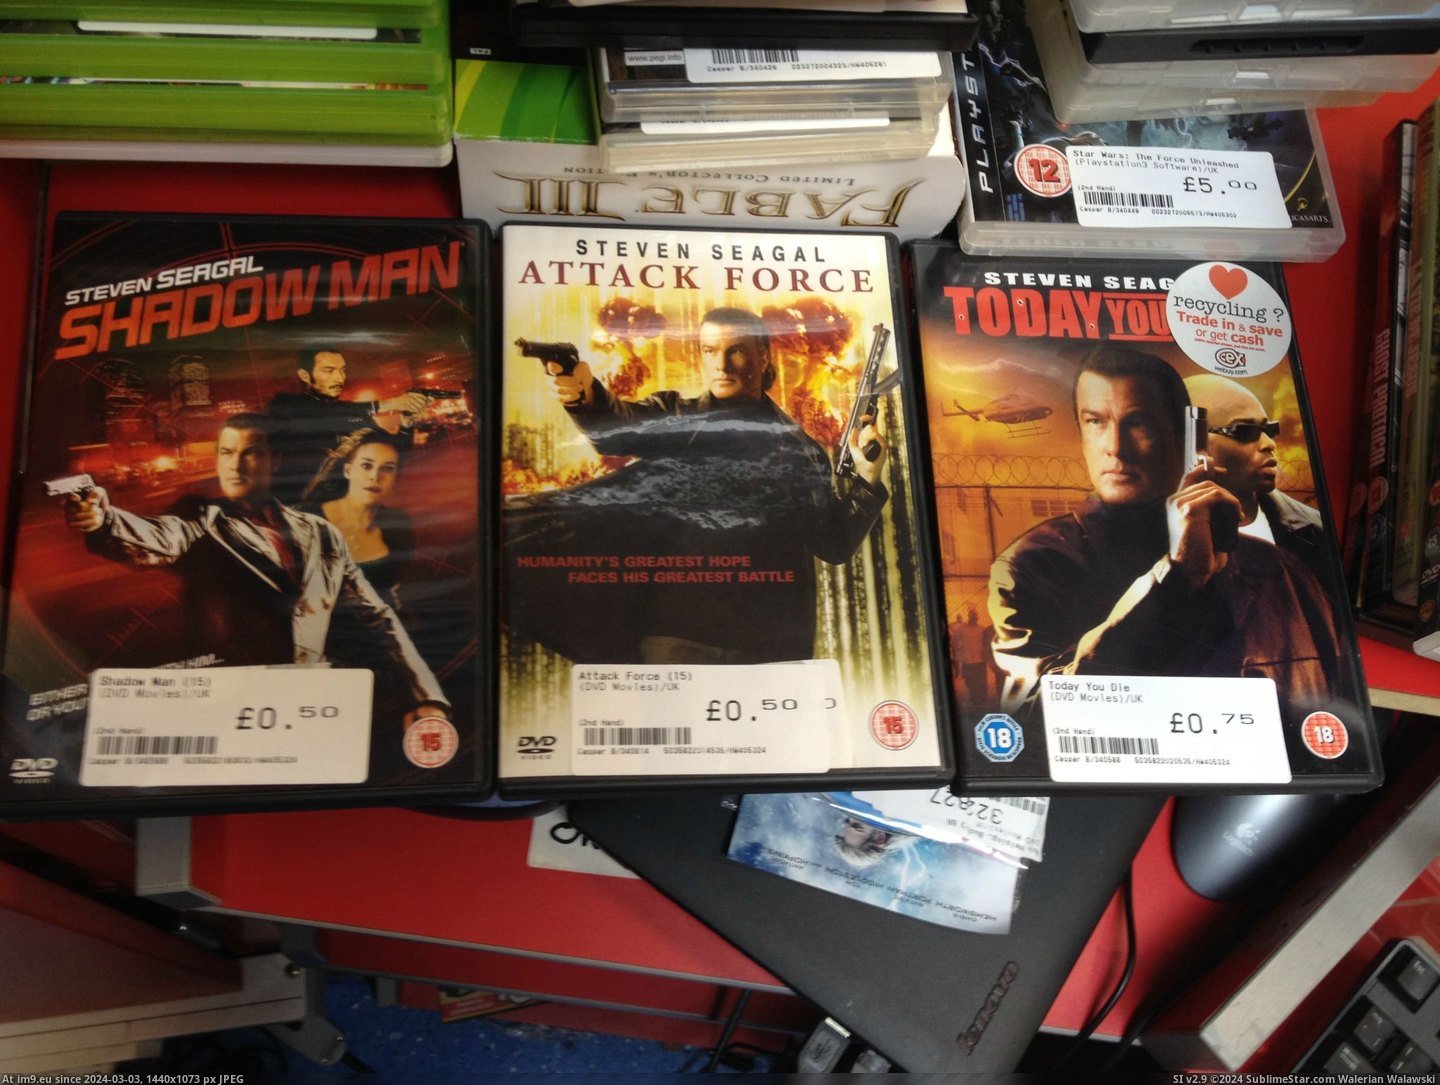 #Was #Shot #Face #Photoshopped #Dvd #Seagul #Covers #Films #Stephen [Mildlyinteresting] The same shot of Stephen Seagul's face was photoshopped onto three different of his films DVD covers. 4 Pic. (Изображение из альбом My r/MILDLYINTERESTING favs))